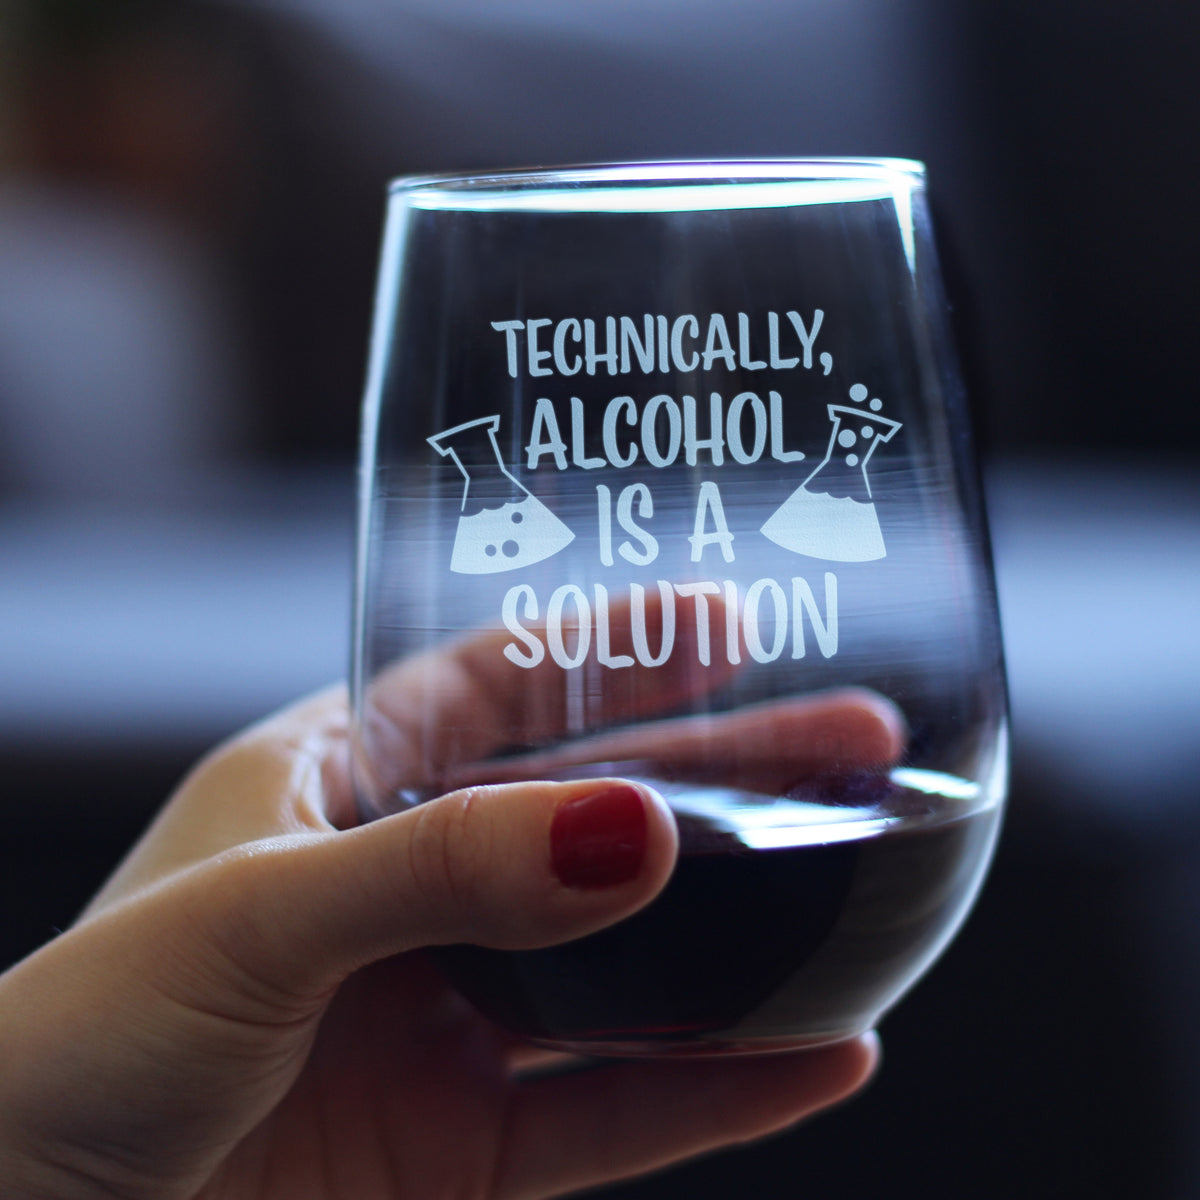 Alcohol Is A Solution – Stemless Wine Glass - Funny Science Teacher Gifts for Women &amp; Men - Fun Teacher Decor - Large